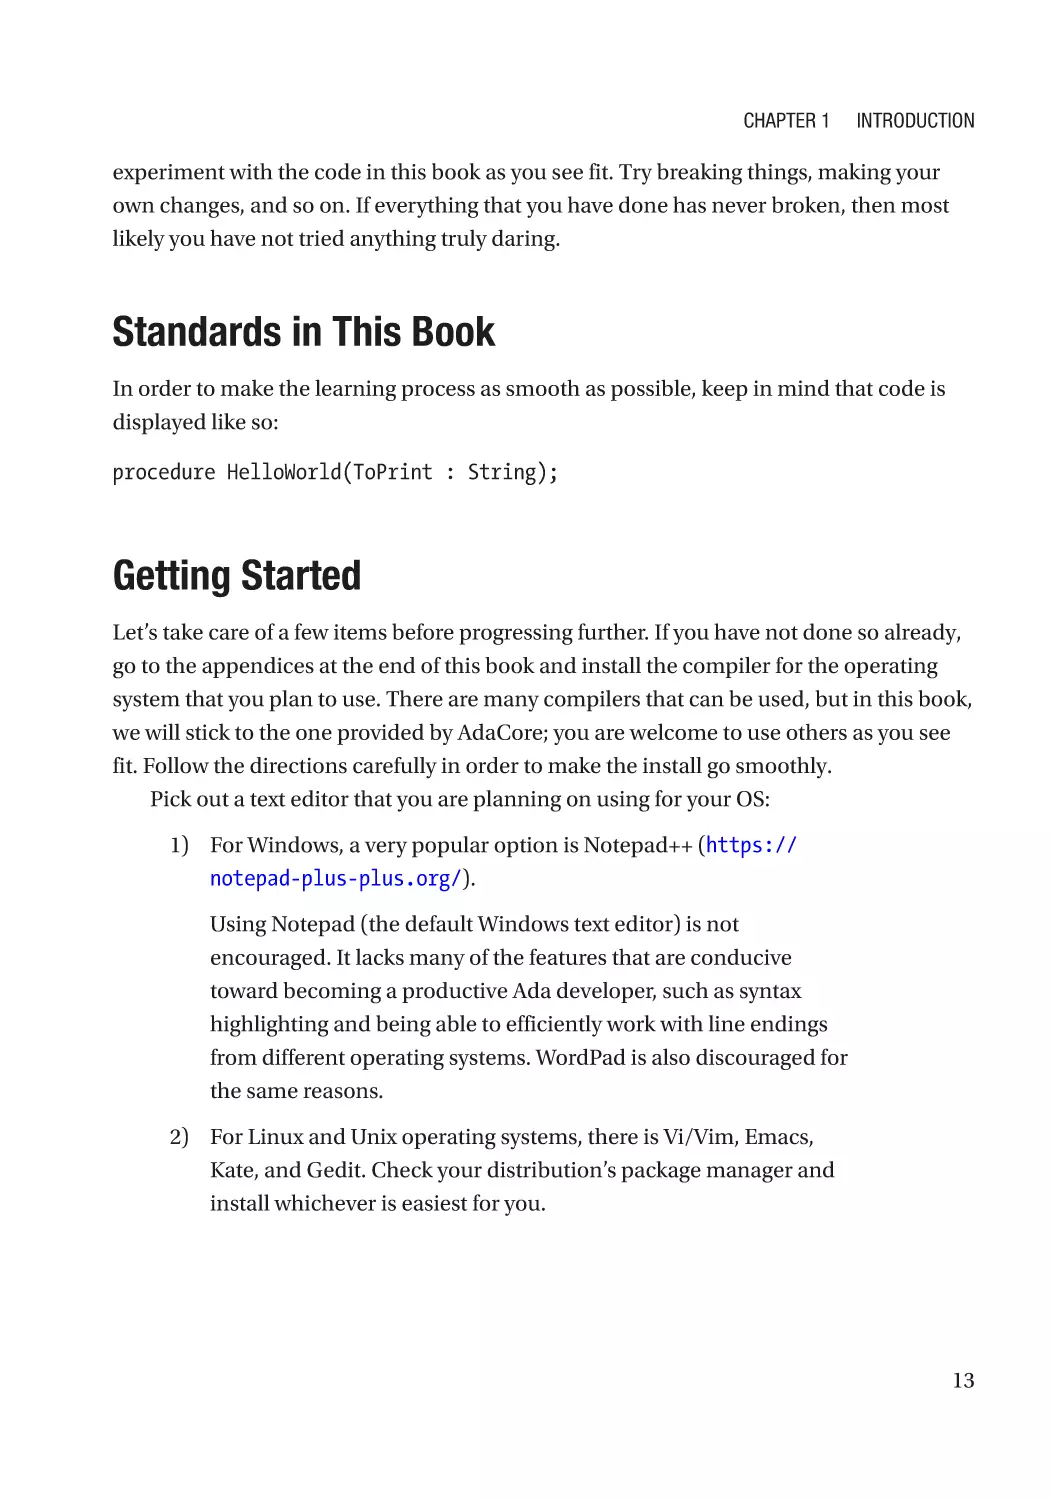 Standards in This Book
Getting Started